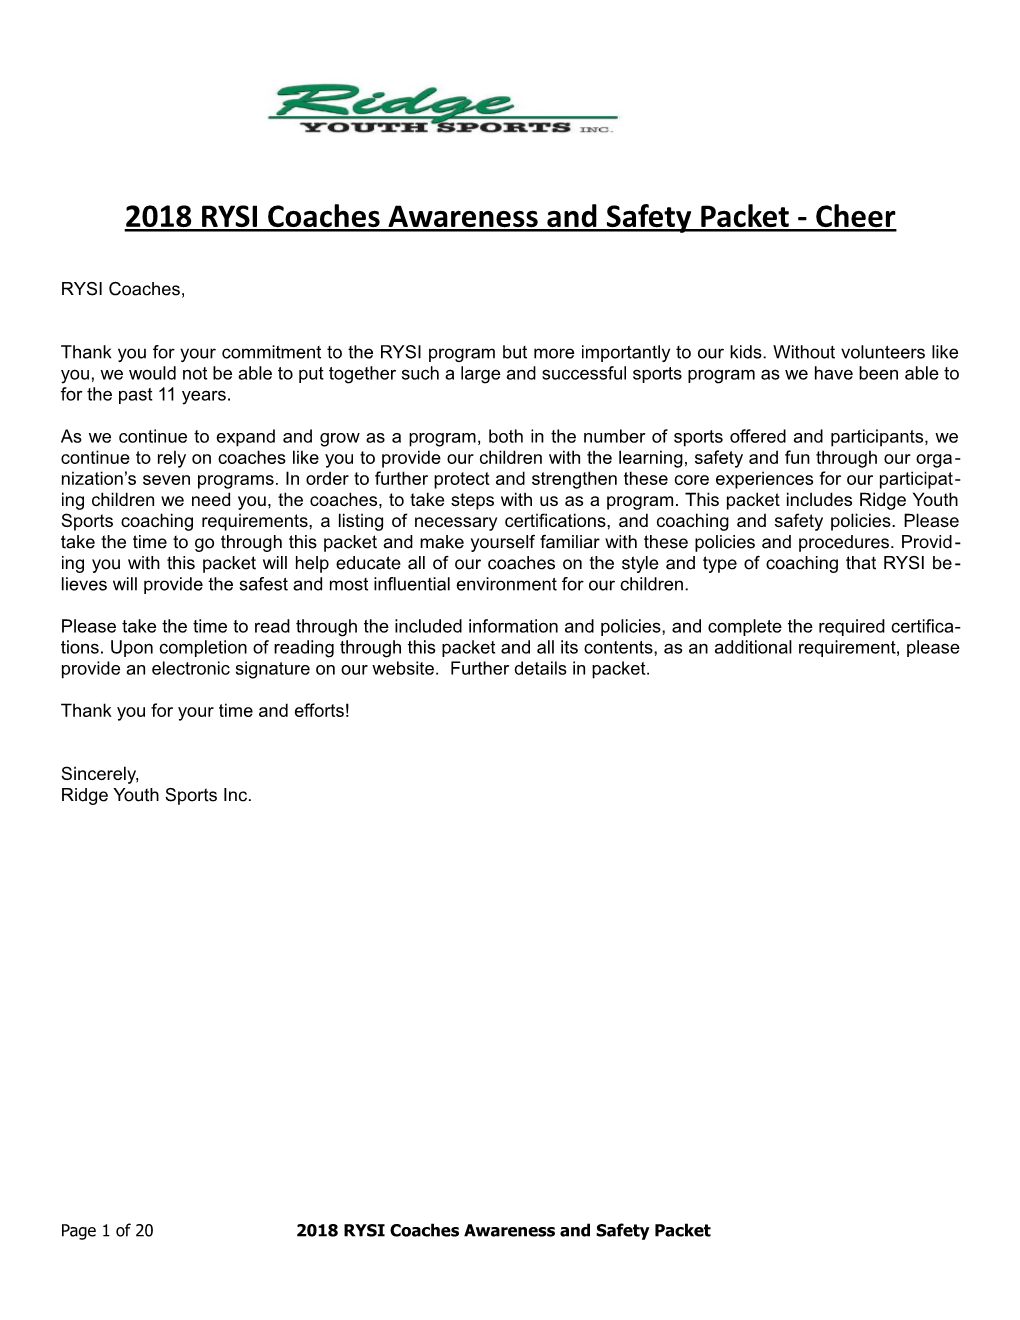 2018 RYSI Coaches Awareness and Safety Packet - Cheer